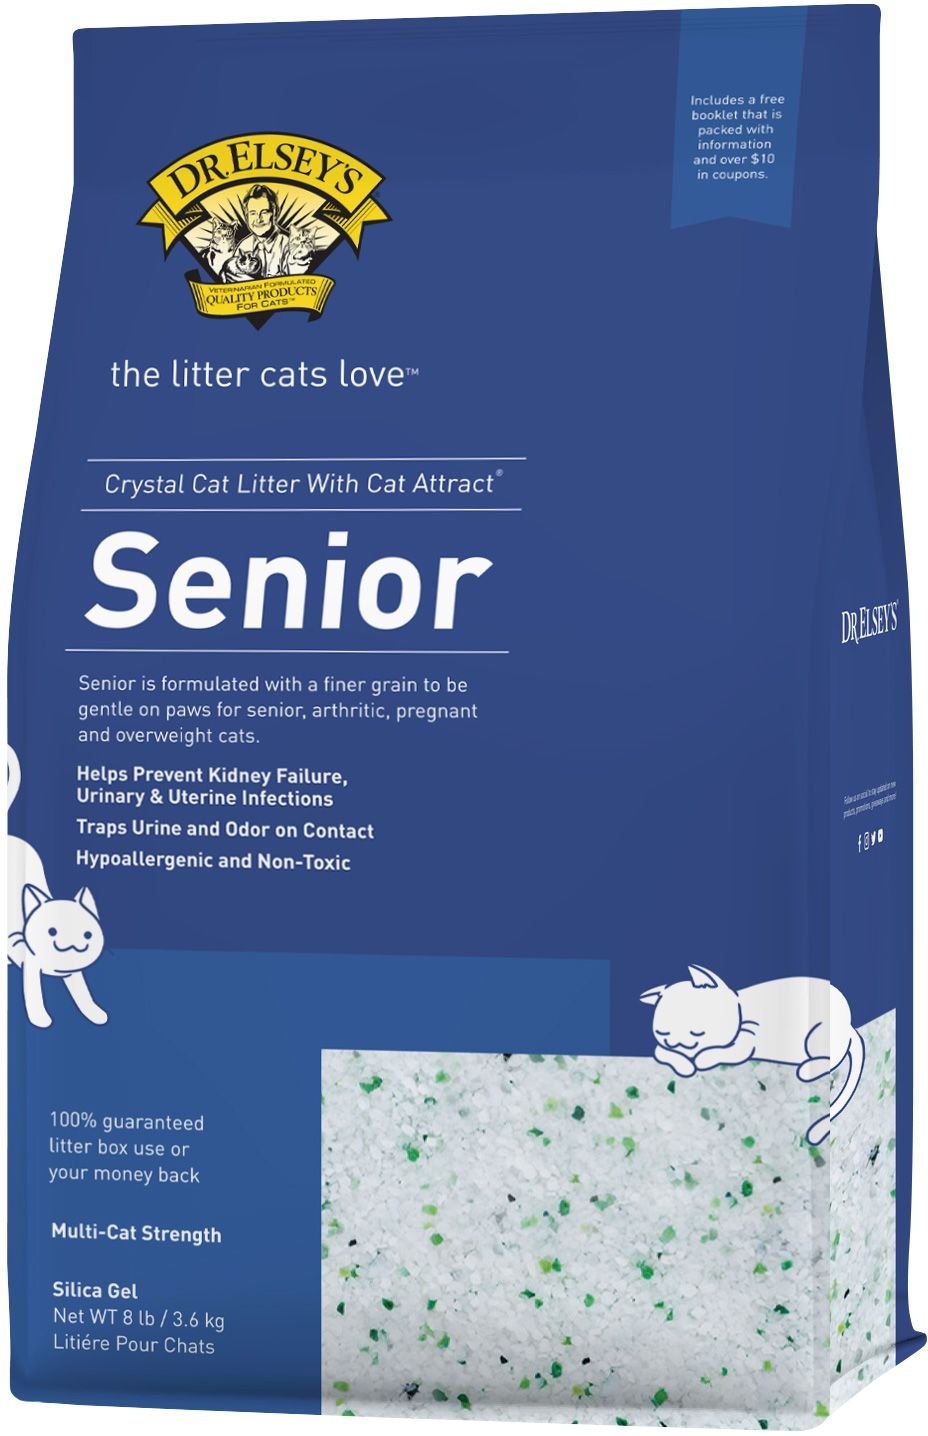 Dr. Elsey's Precious Cat Unscented Non-Clumping Crystal Cat Litter